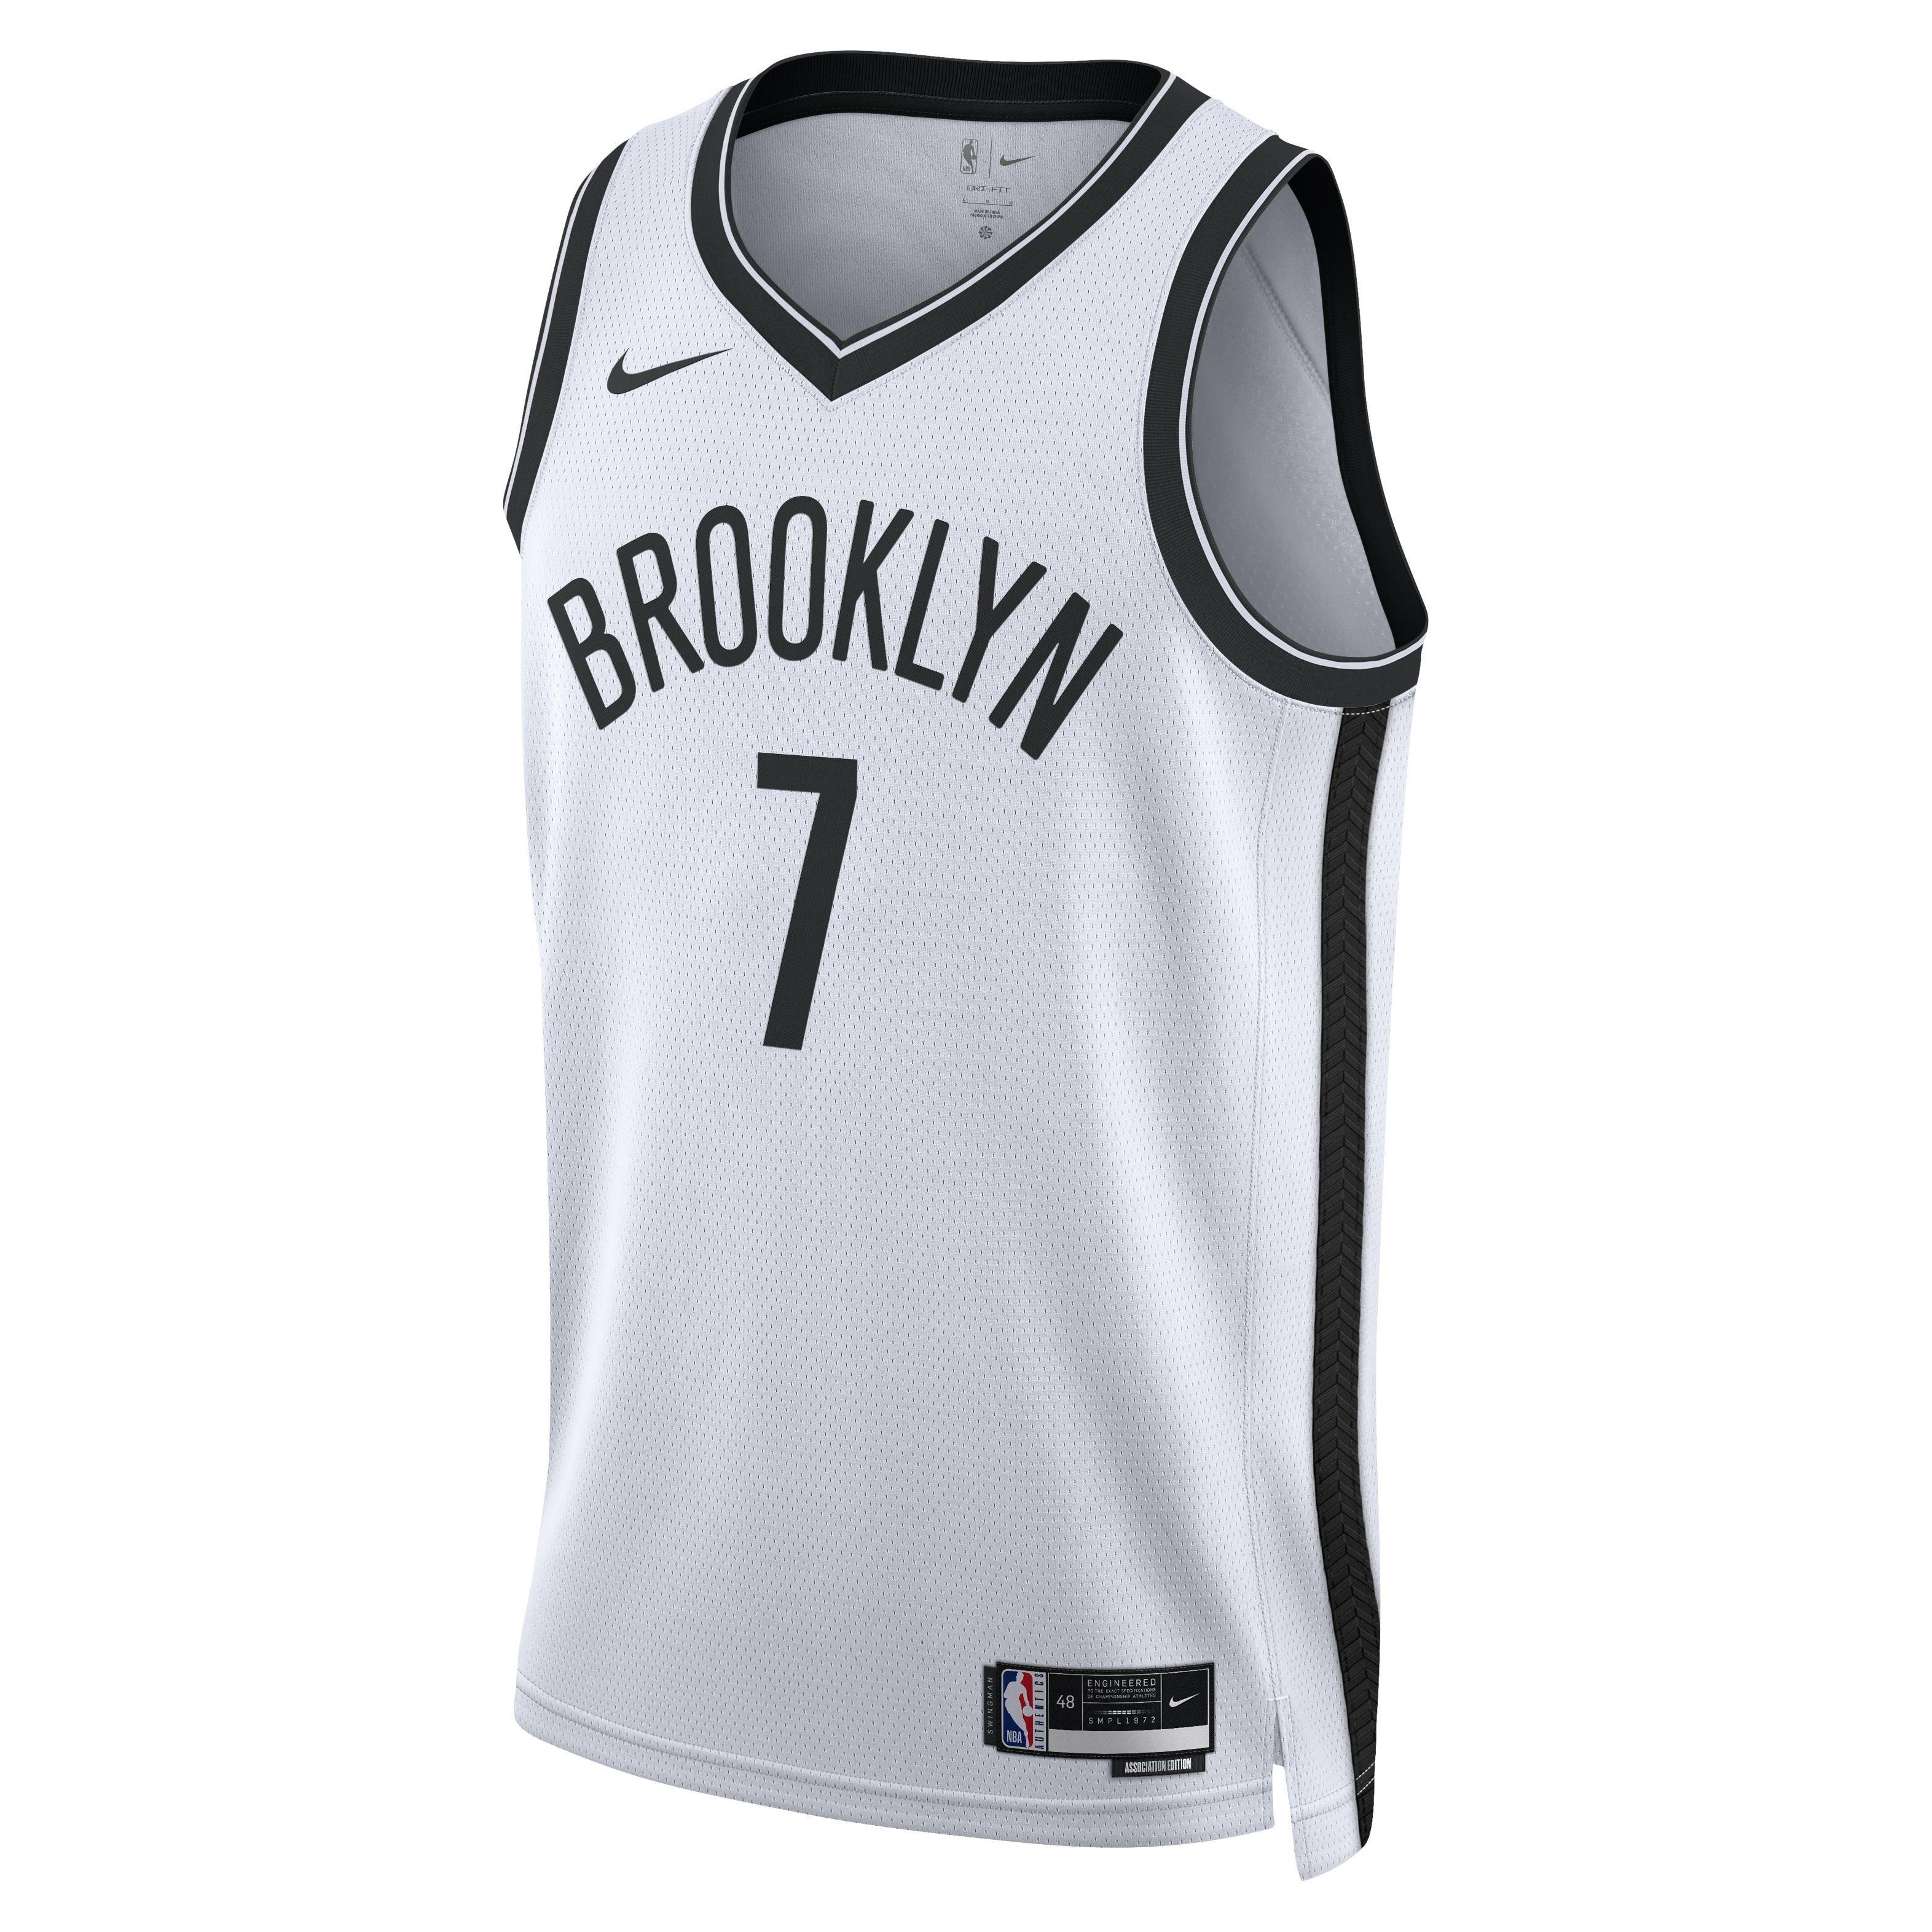 Buy NBA BROOKLYN NETS DRI-FIT CITY EDITION SWINGMAN JERSEY KEVIN DURANT for  N/A 0.0 on !